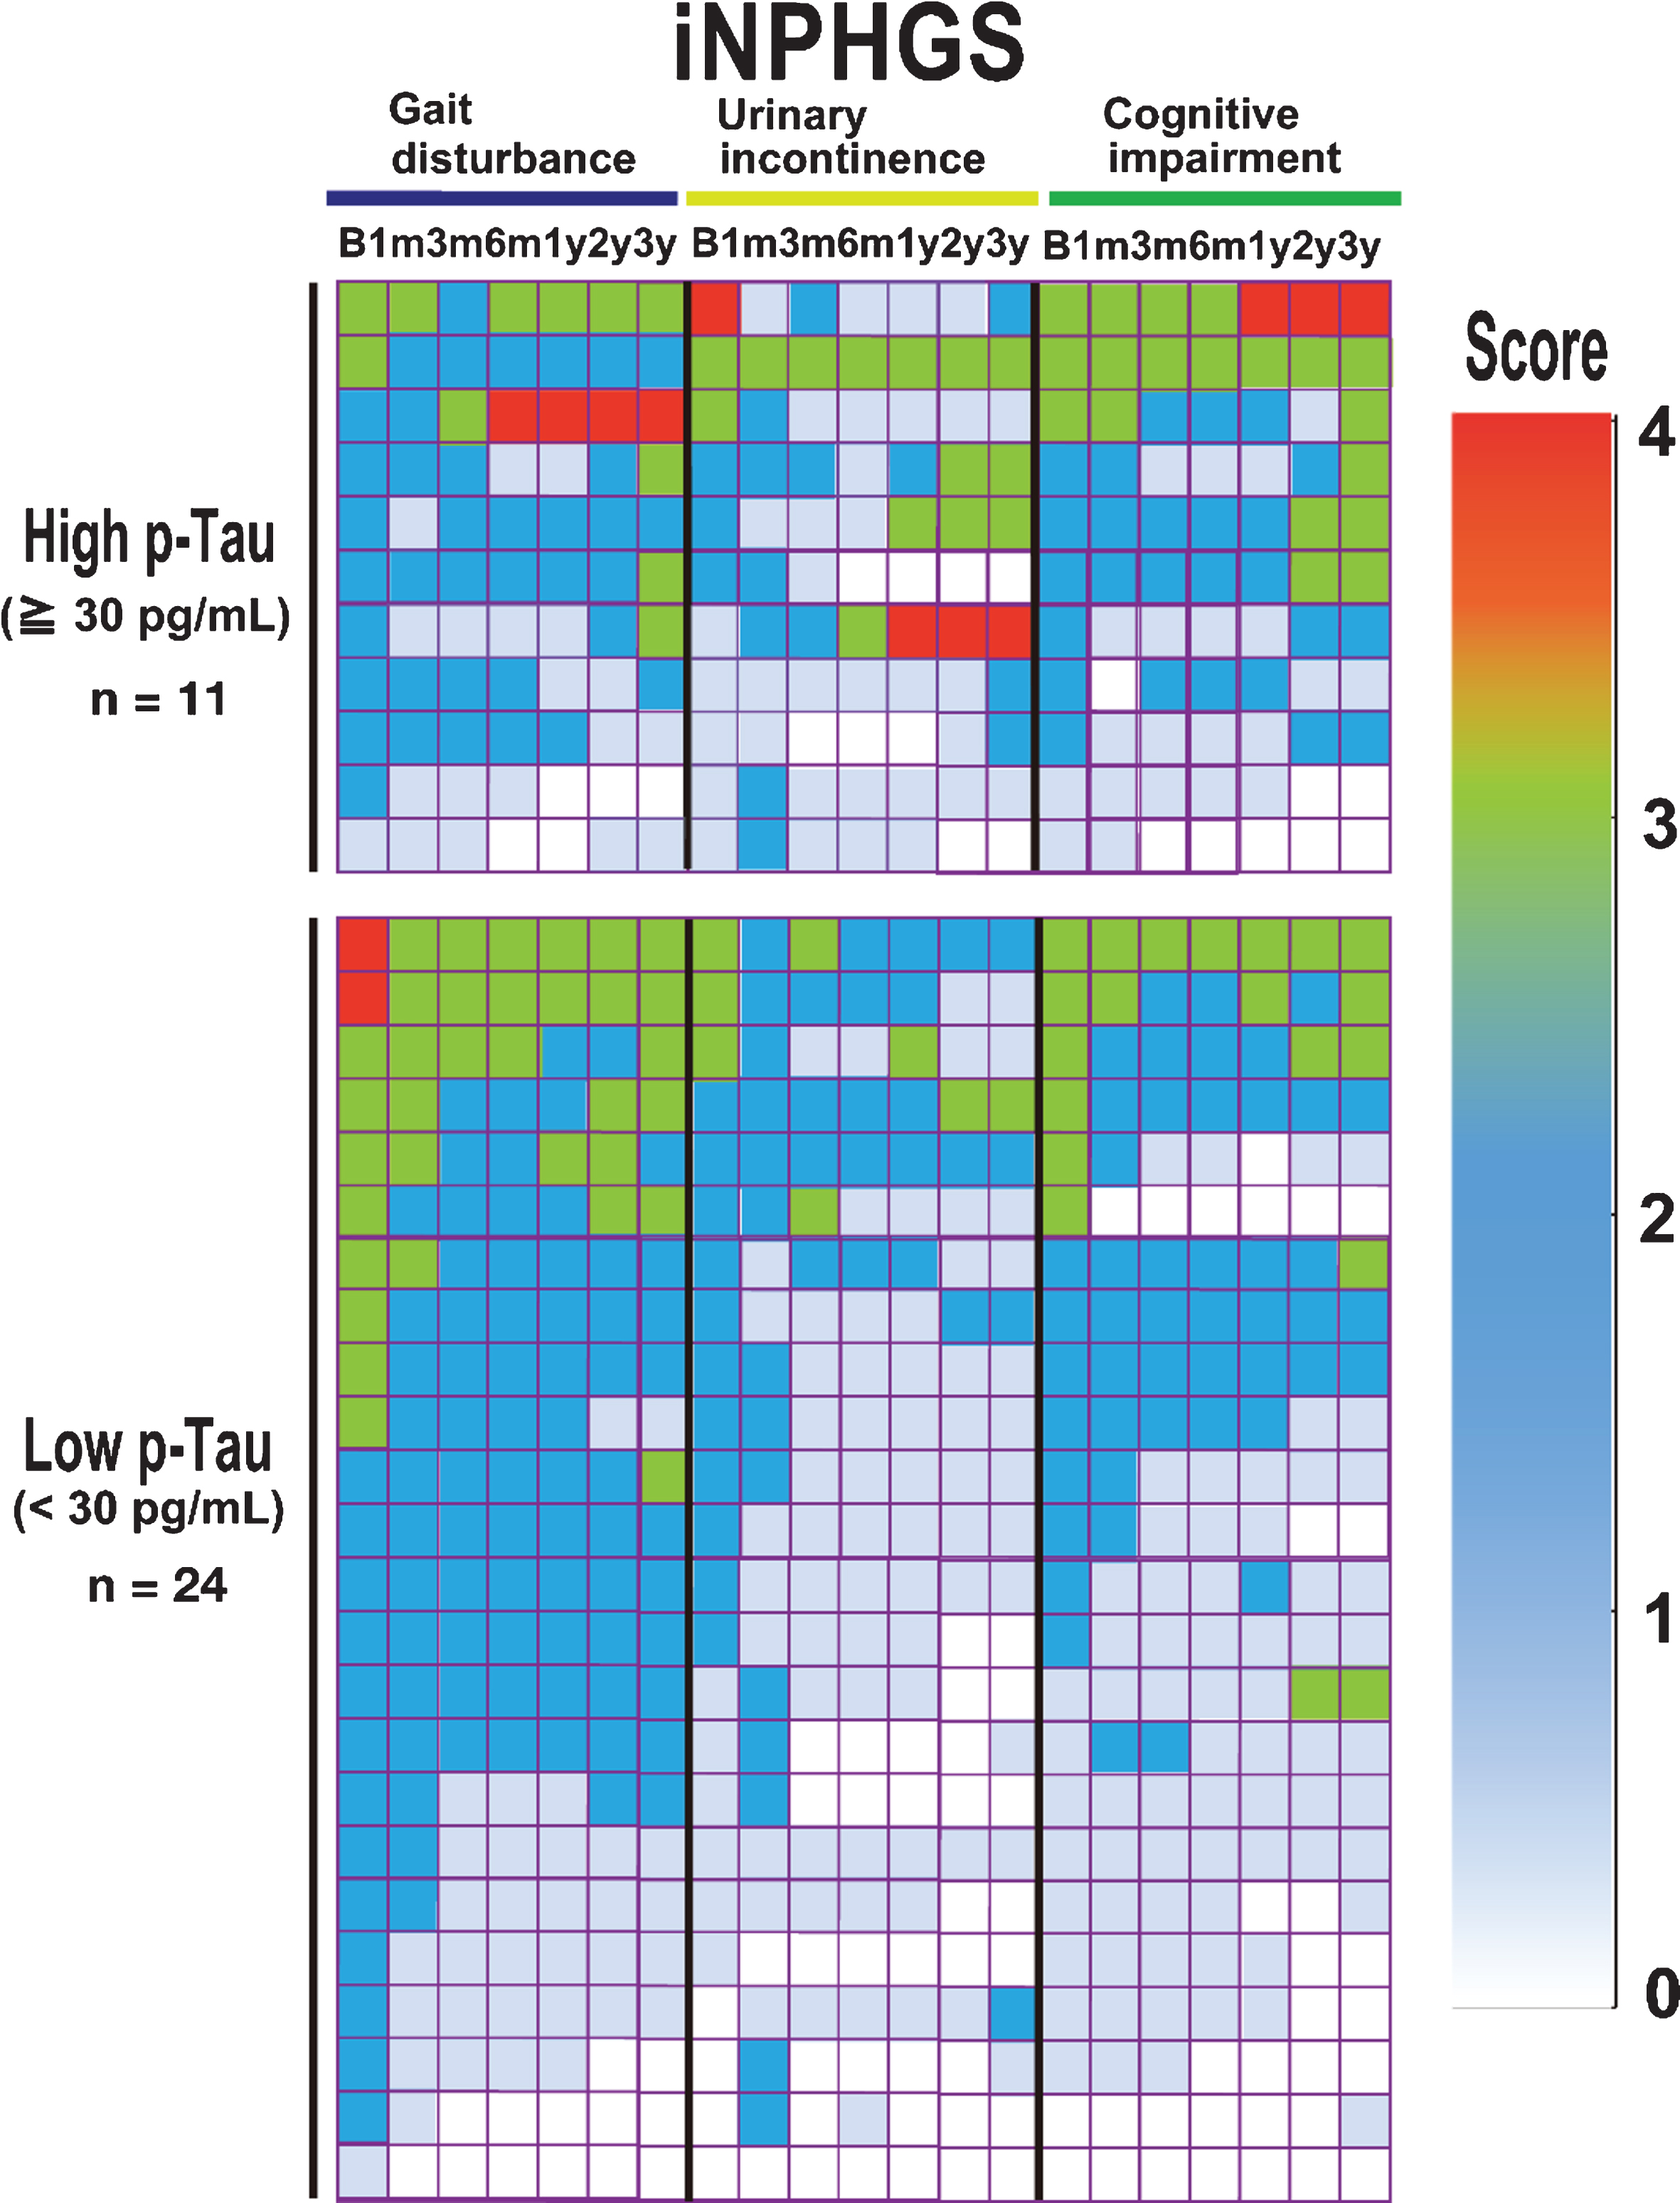 Heat map of iNPHGS impairments in the low and high p-Tau groups over three-year follow-up. Scores on the three iNPHGS subcategories (gait disturbance, urinary disturbance, and dementia) in the low (<30 pg/mL, n = 24; lower panel) and high (≥30 pg/mL, n = 11; upper panel) p-Tau groups during the follow-up period are colored by the degree of severity.